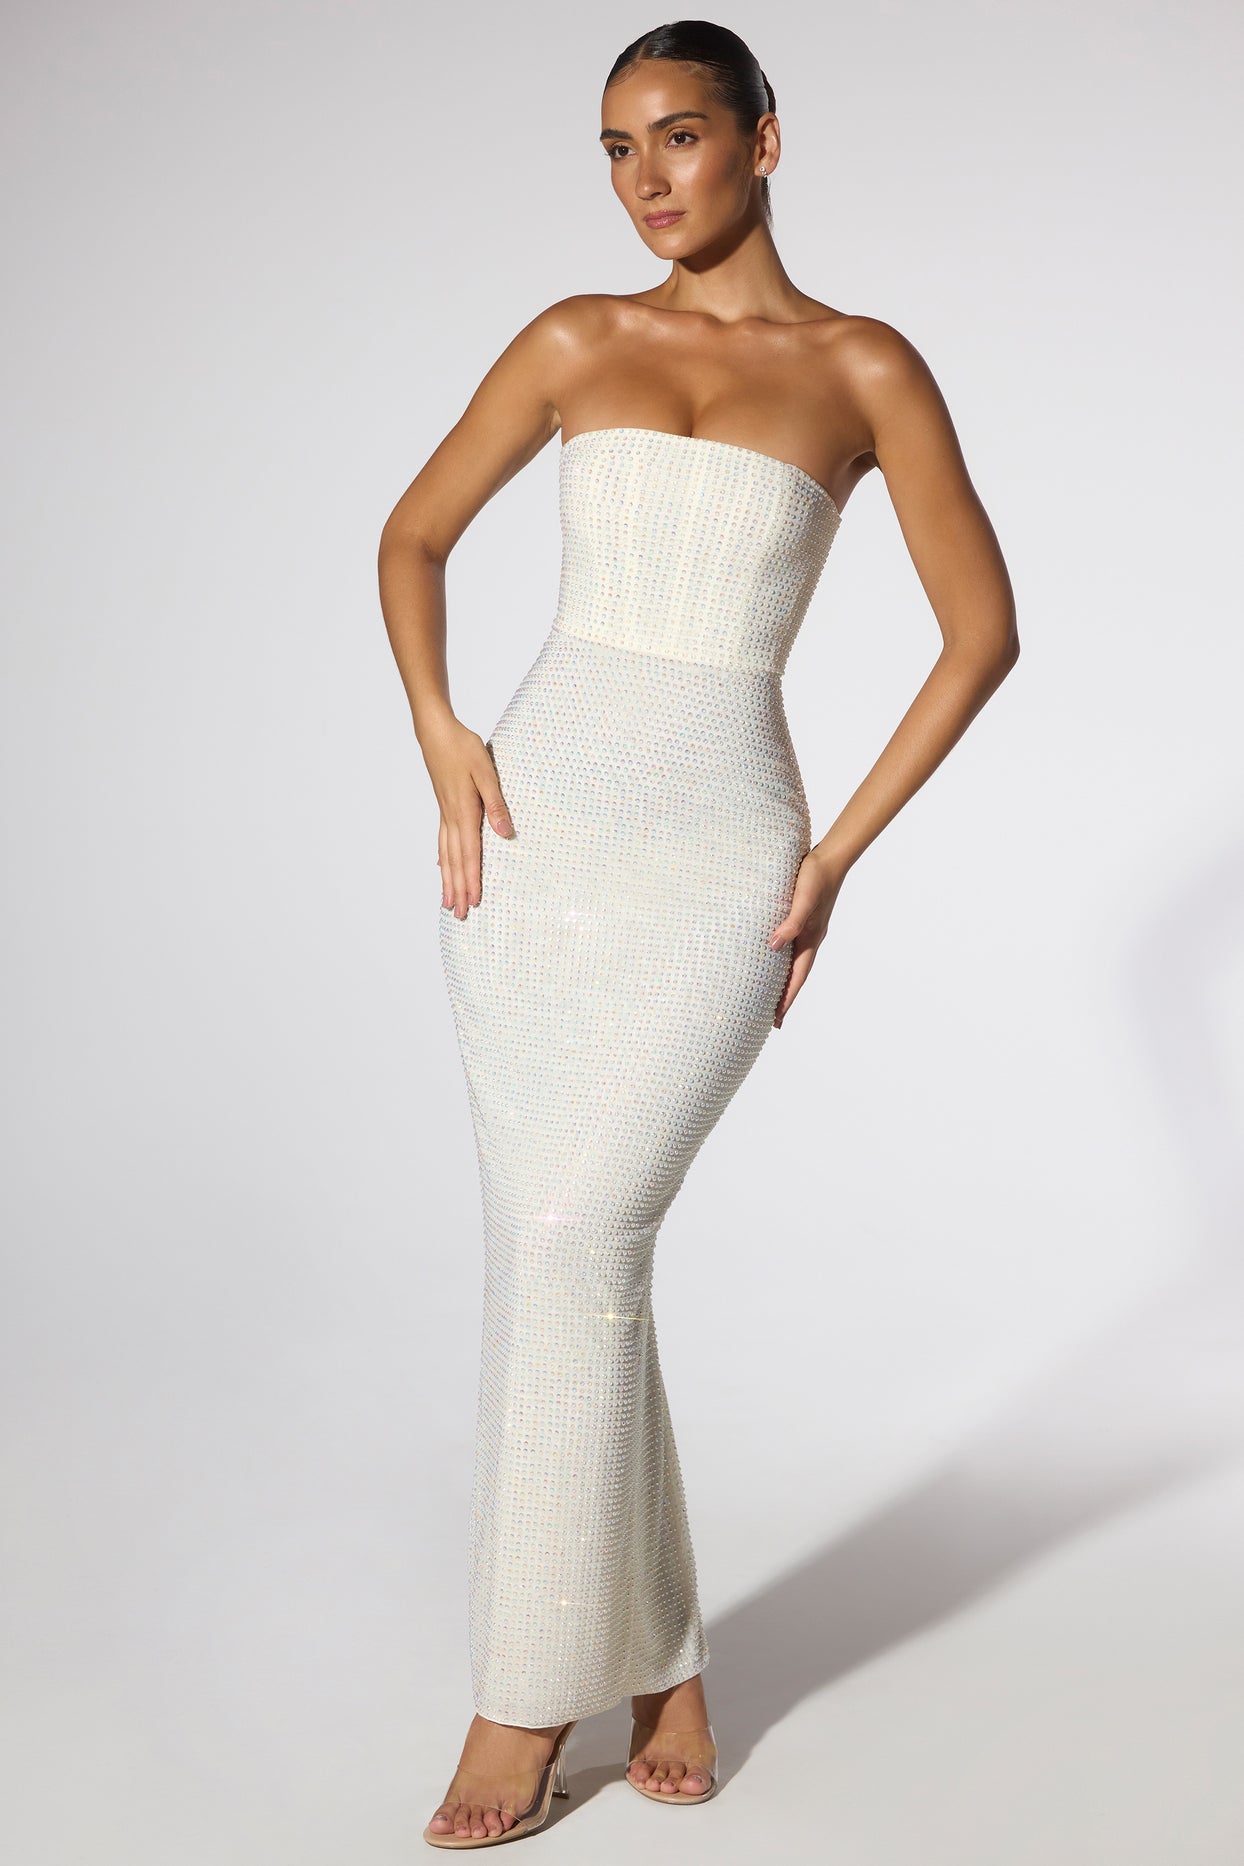 Embellished Strapless Evening Gown in Ivory